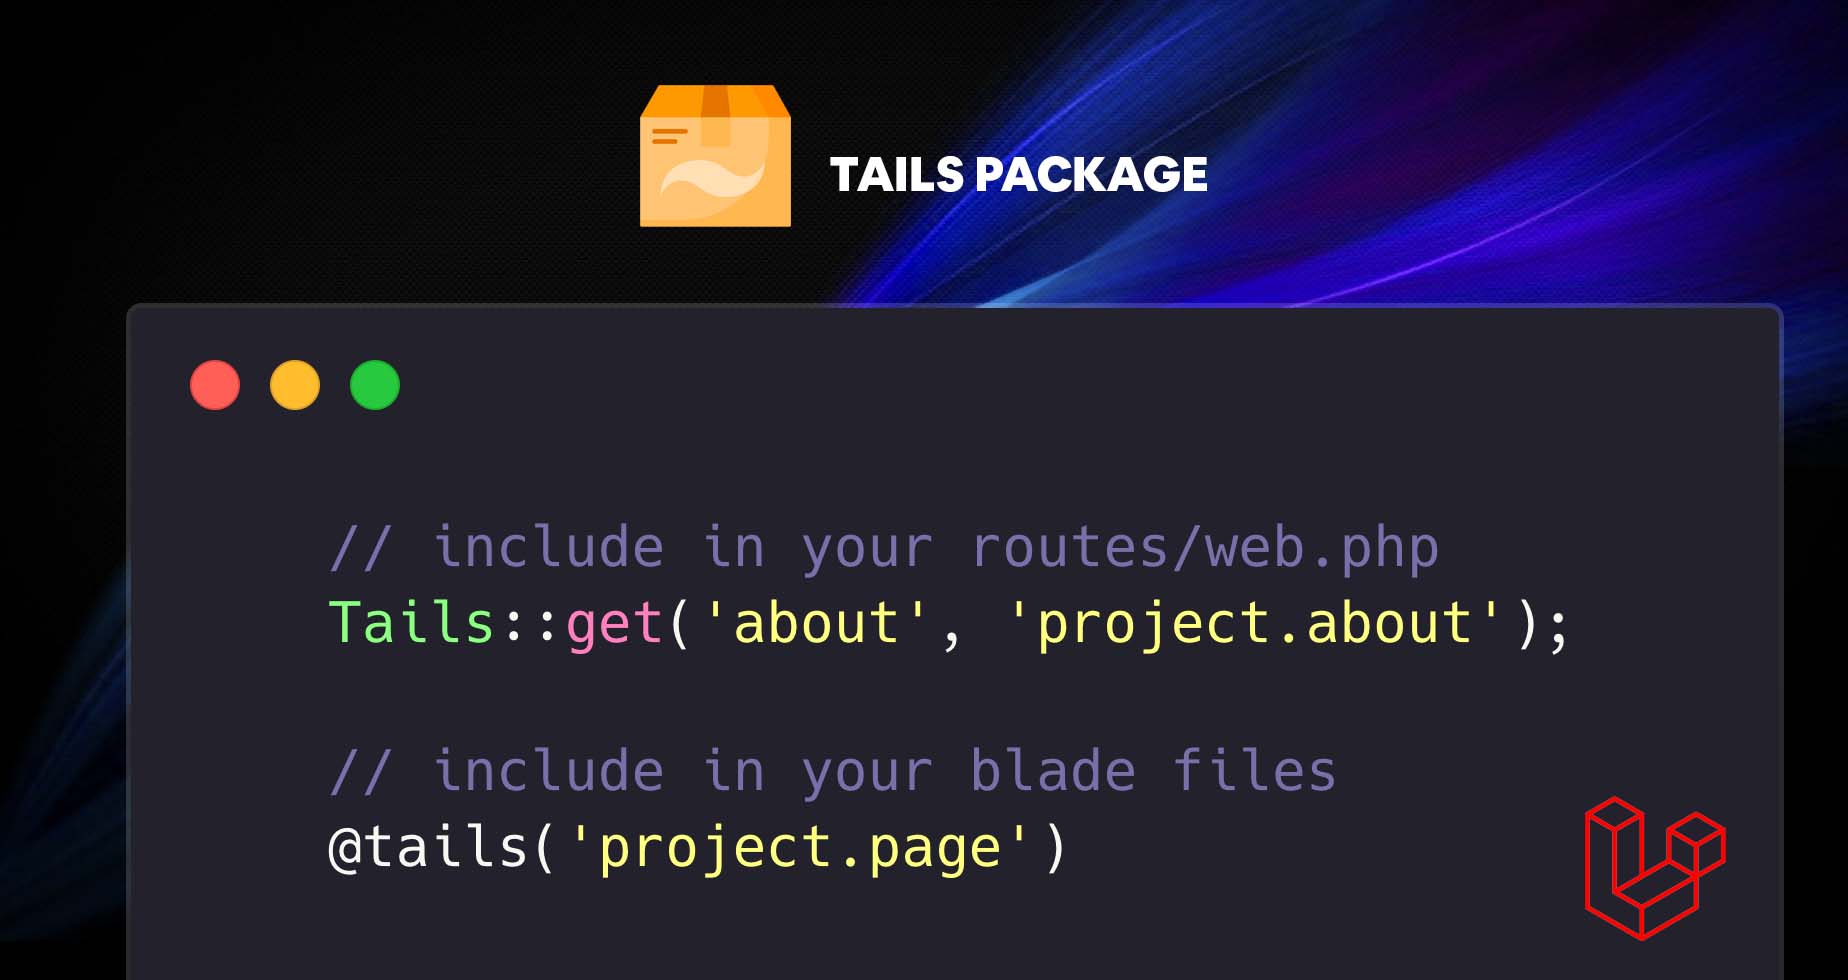 Tails Package Image